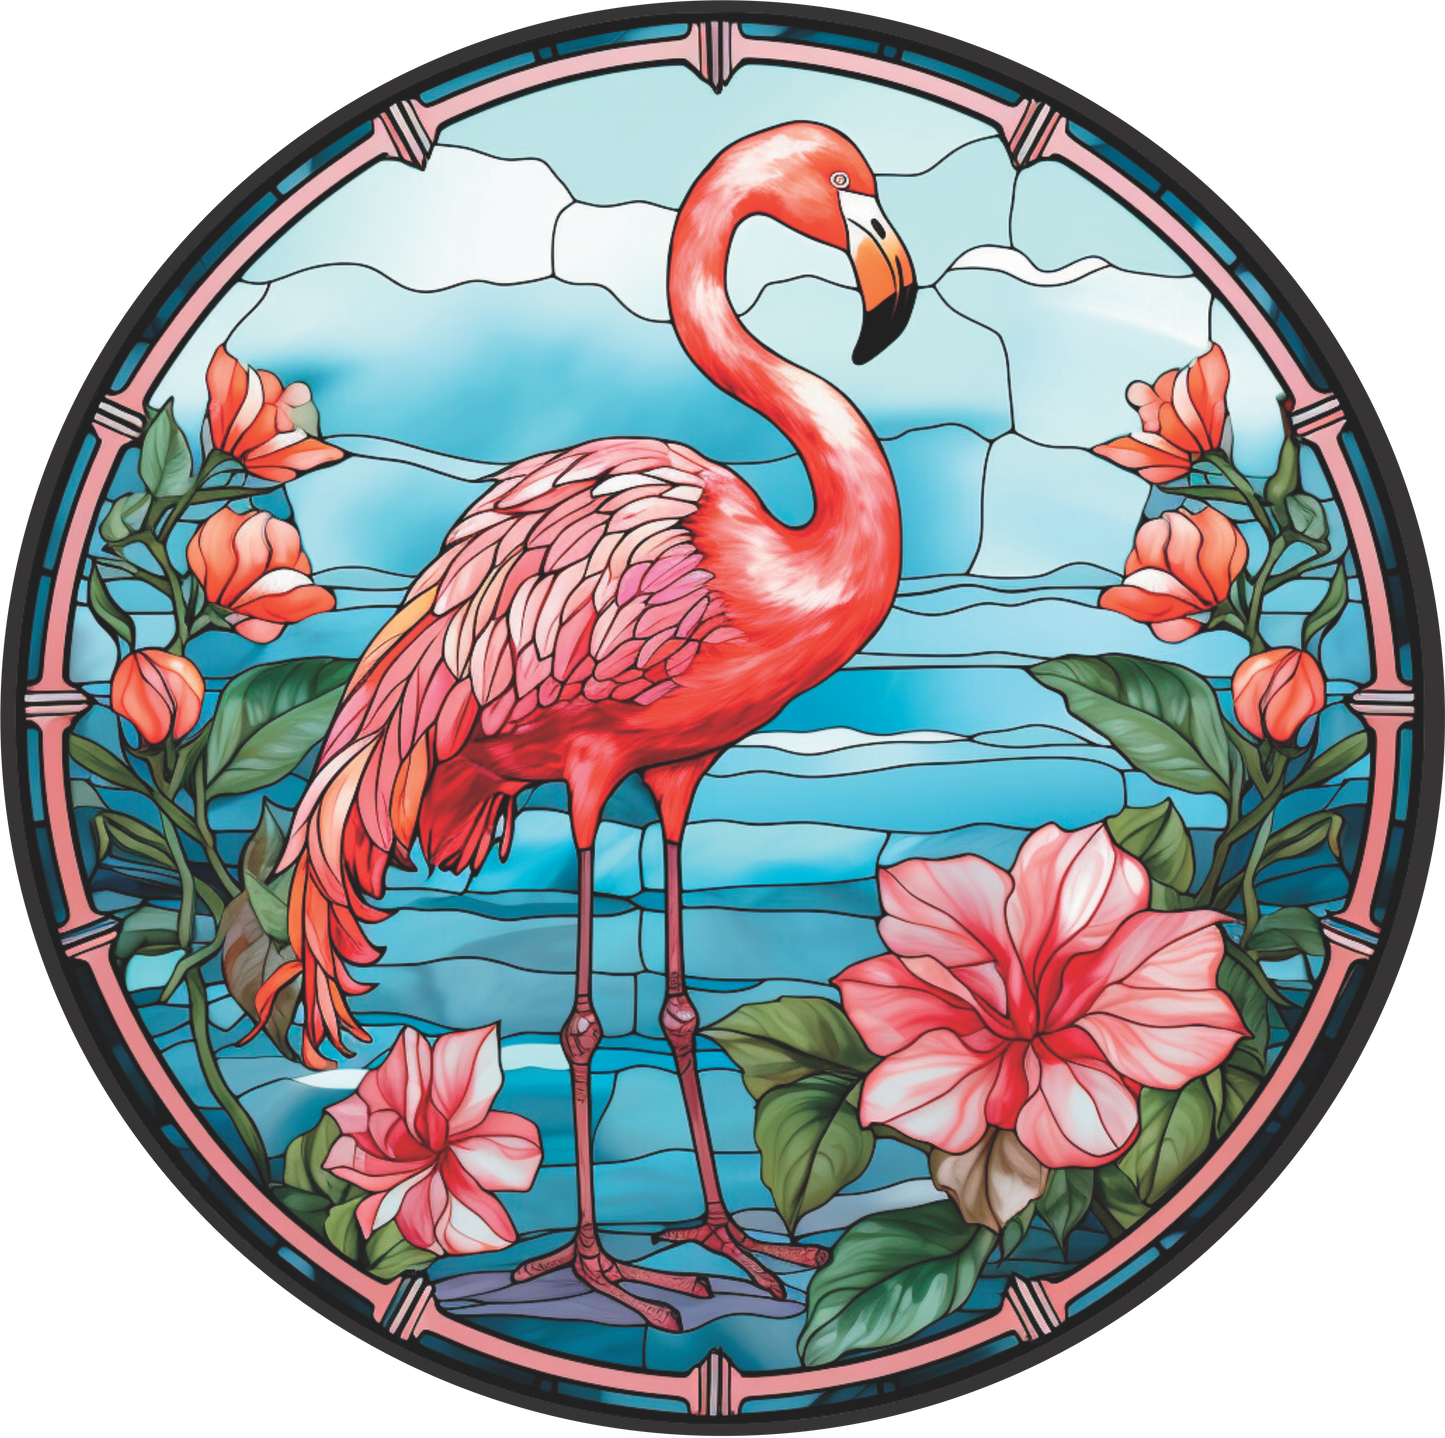 Flamingo with Hibiscus Flowers on Stained Glass Round Sign